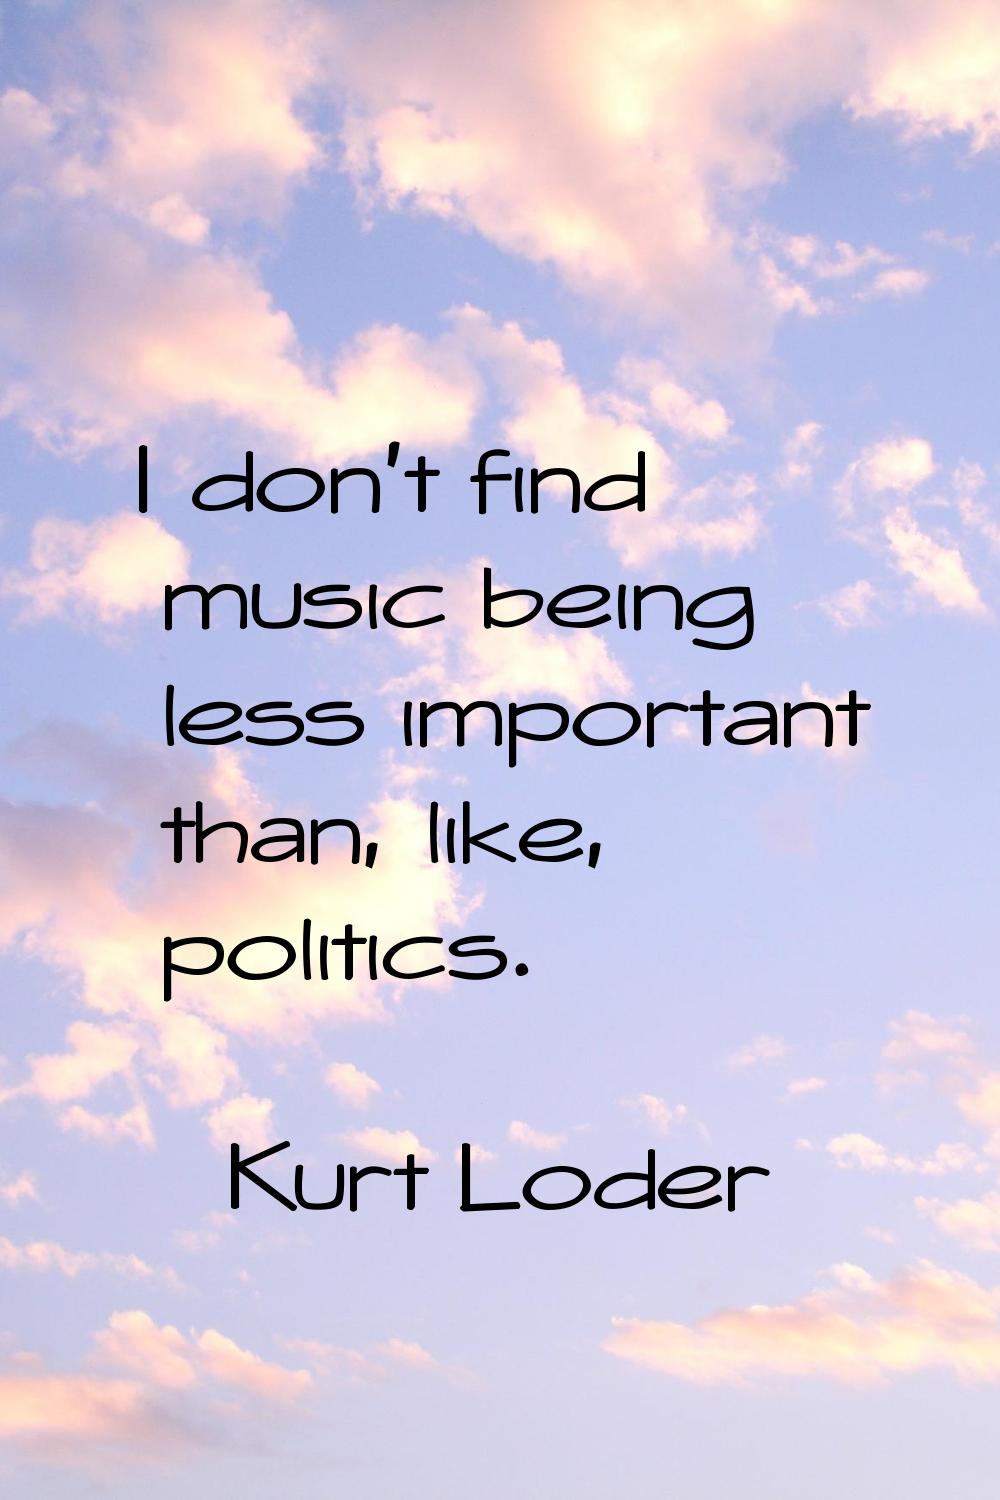 I don't find music being less important than, like, politics.